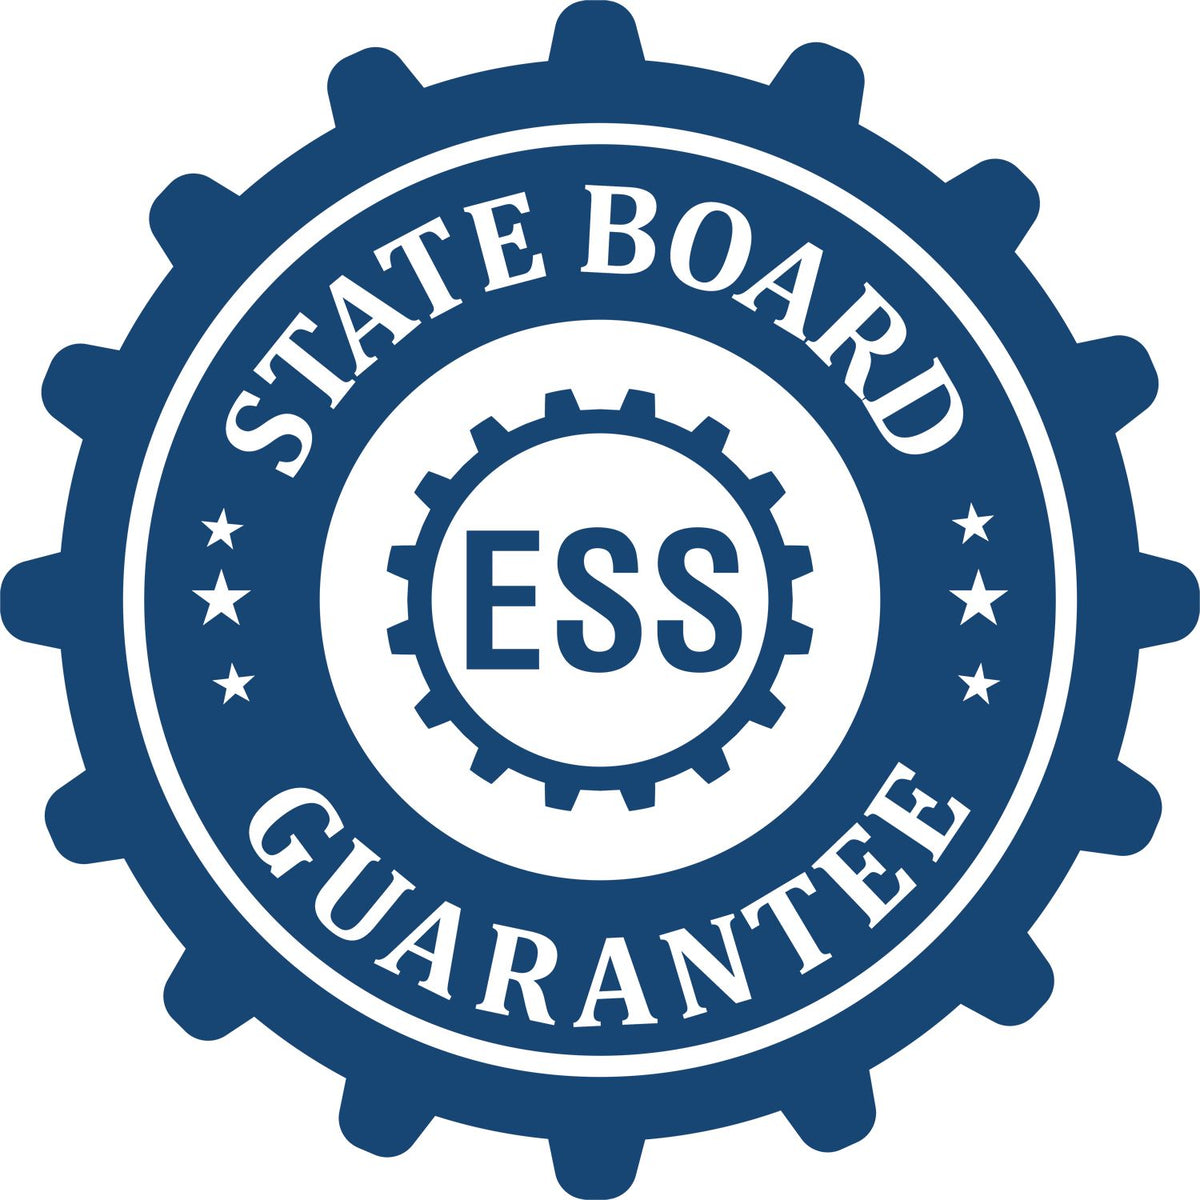 An emblem in a gear shape illustrating a state board guarantee for the Soft Pocket Iowa Landscape Architect Embosser product.